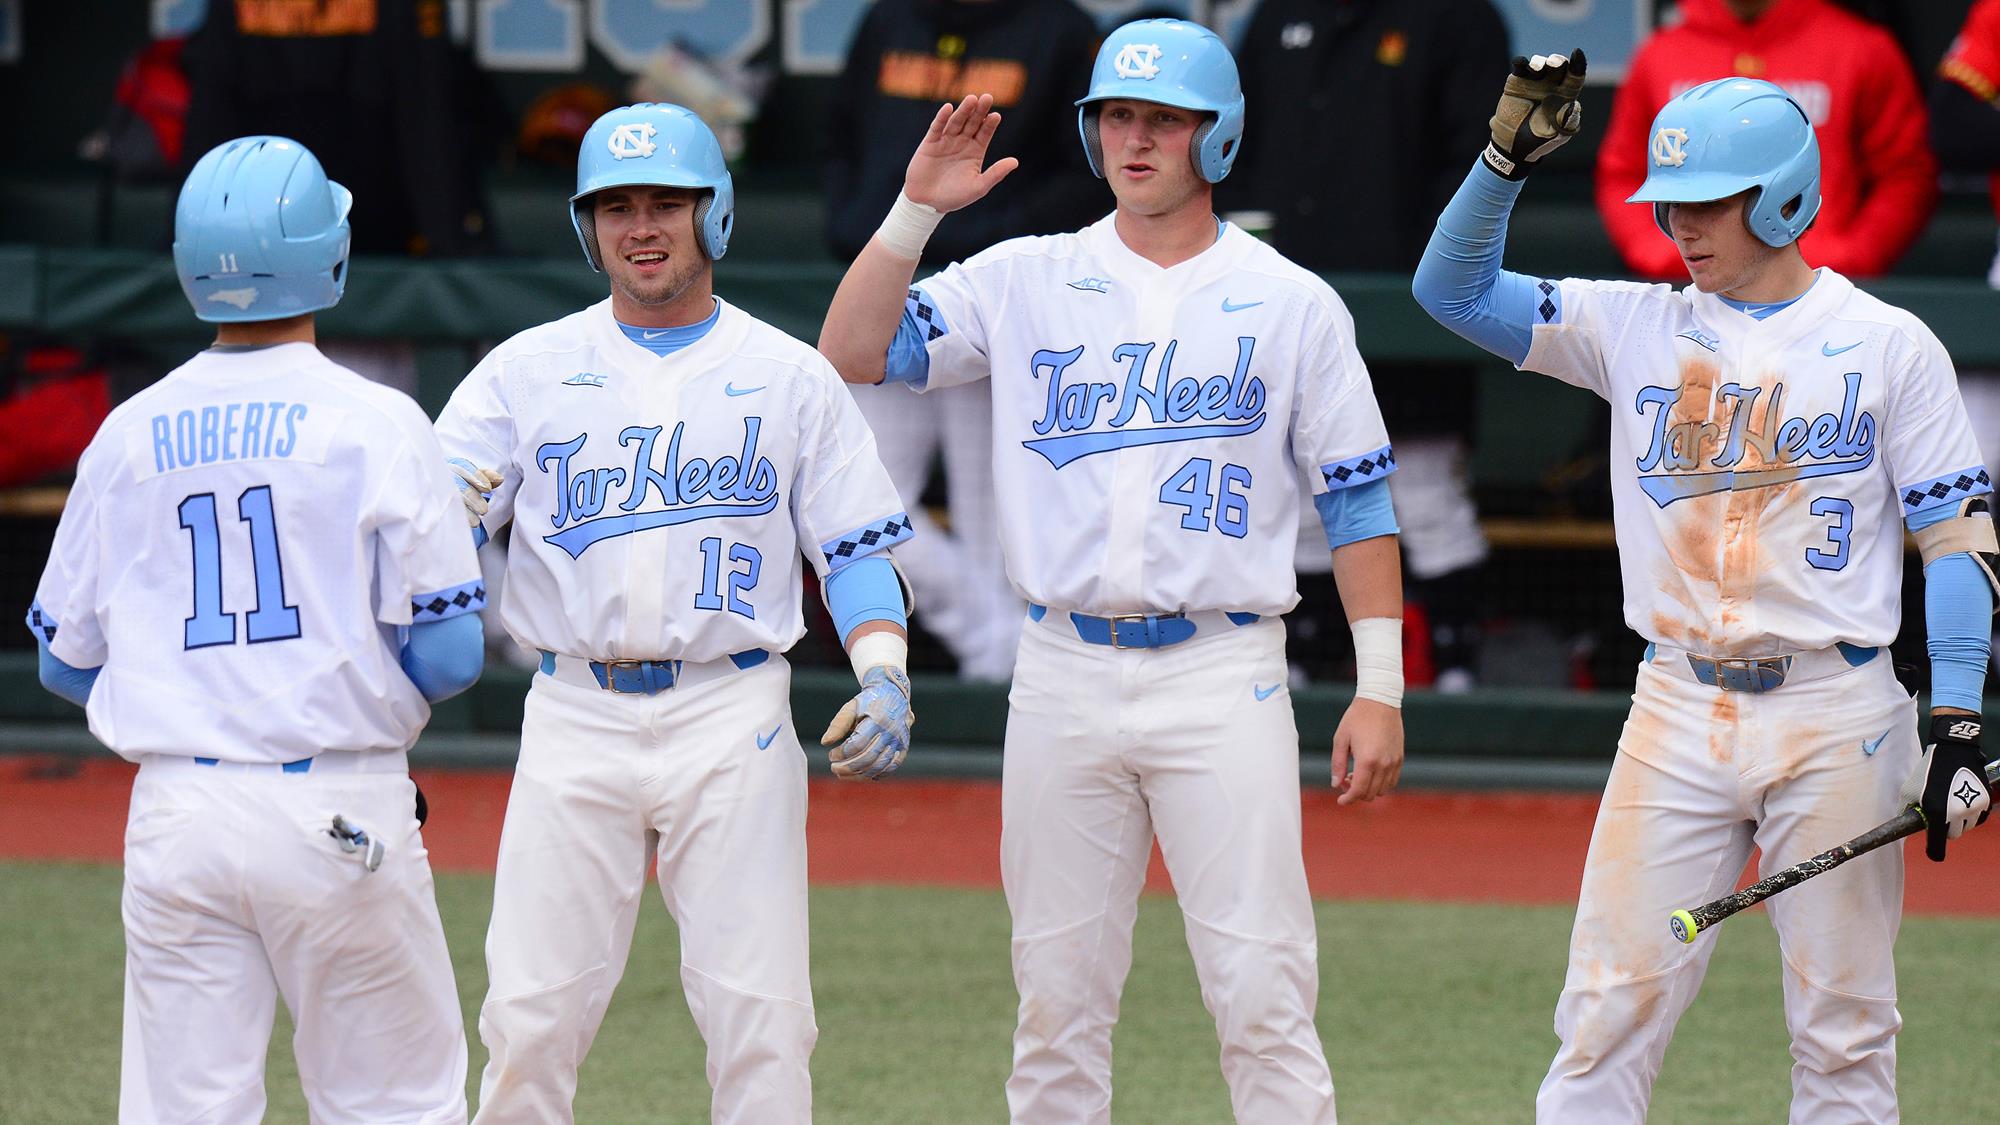 Tar Heels Use Four Runs in 12th Inning to Defeat Miami on the Road